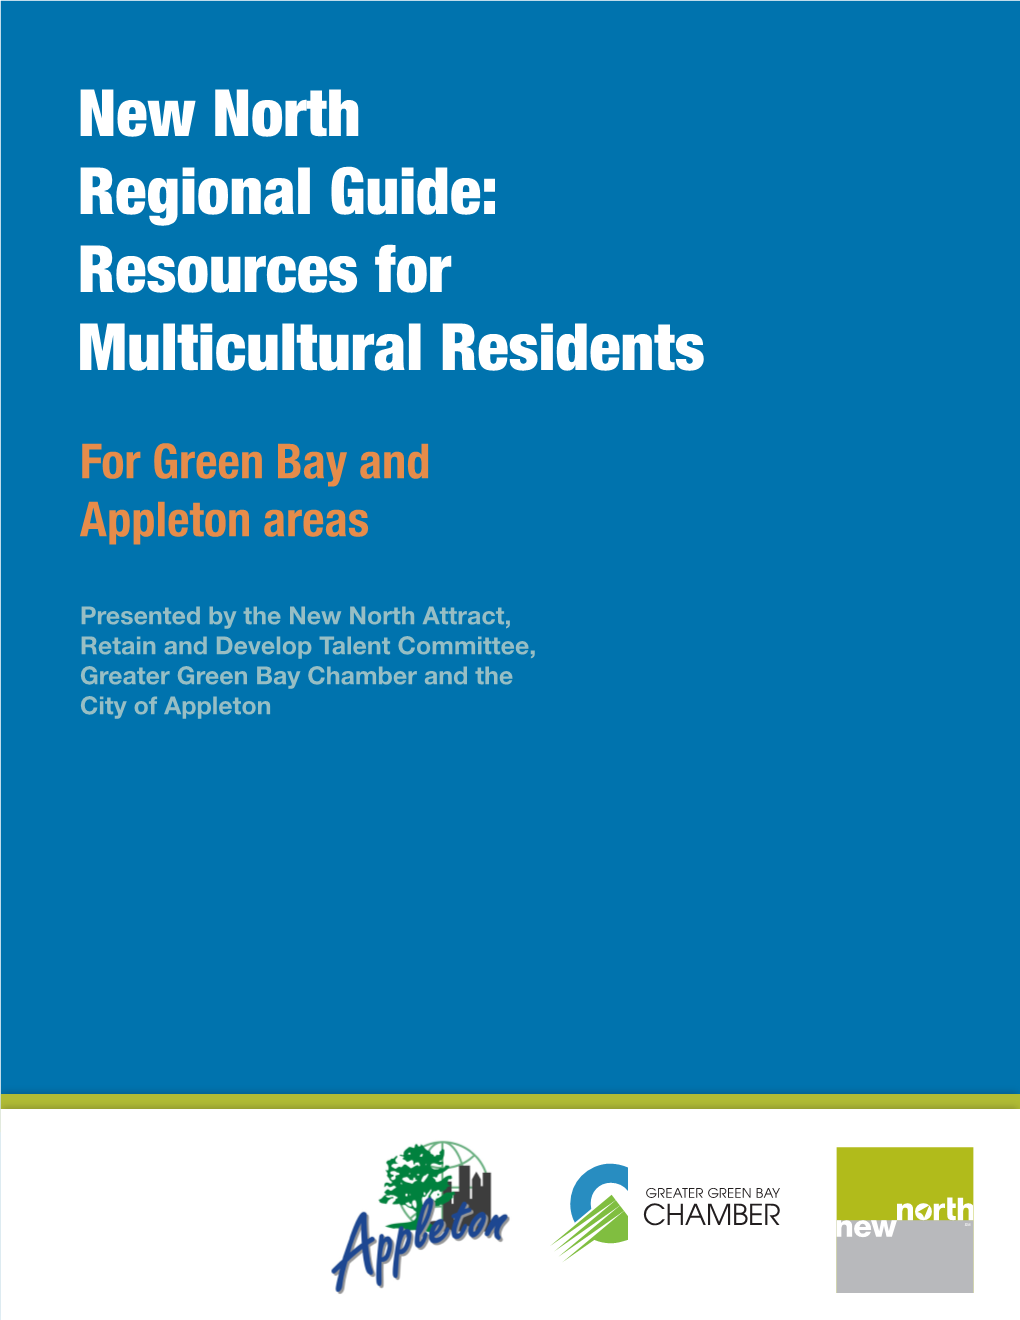 Resources for Multicultural Residents